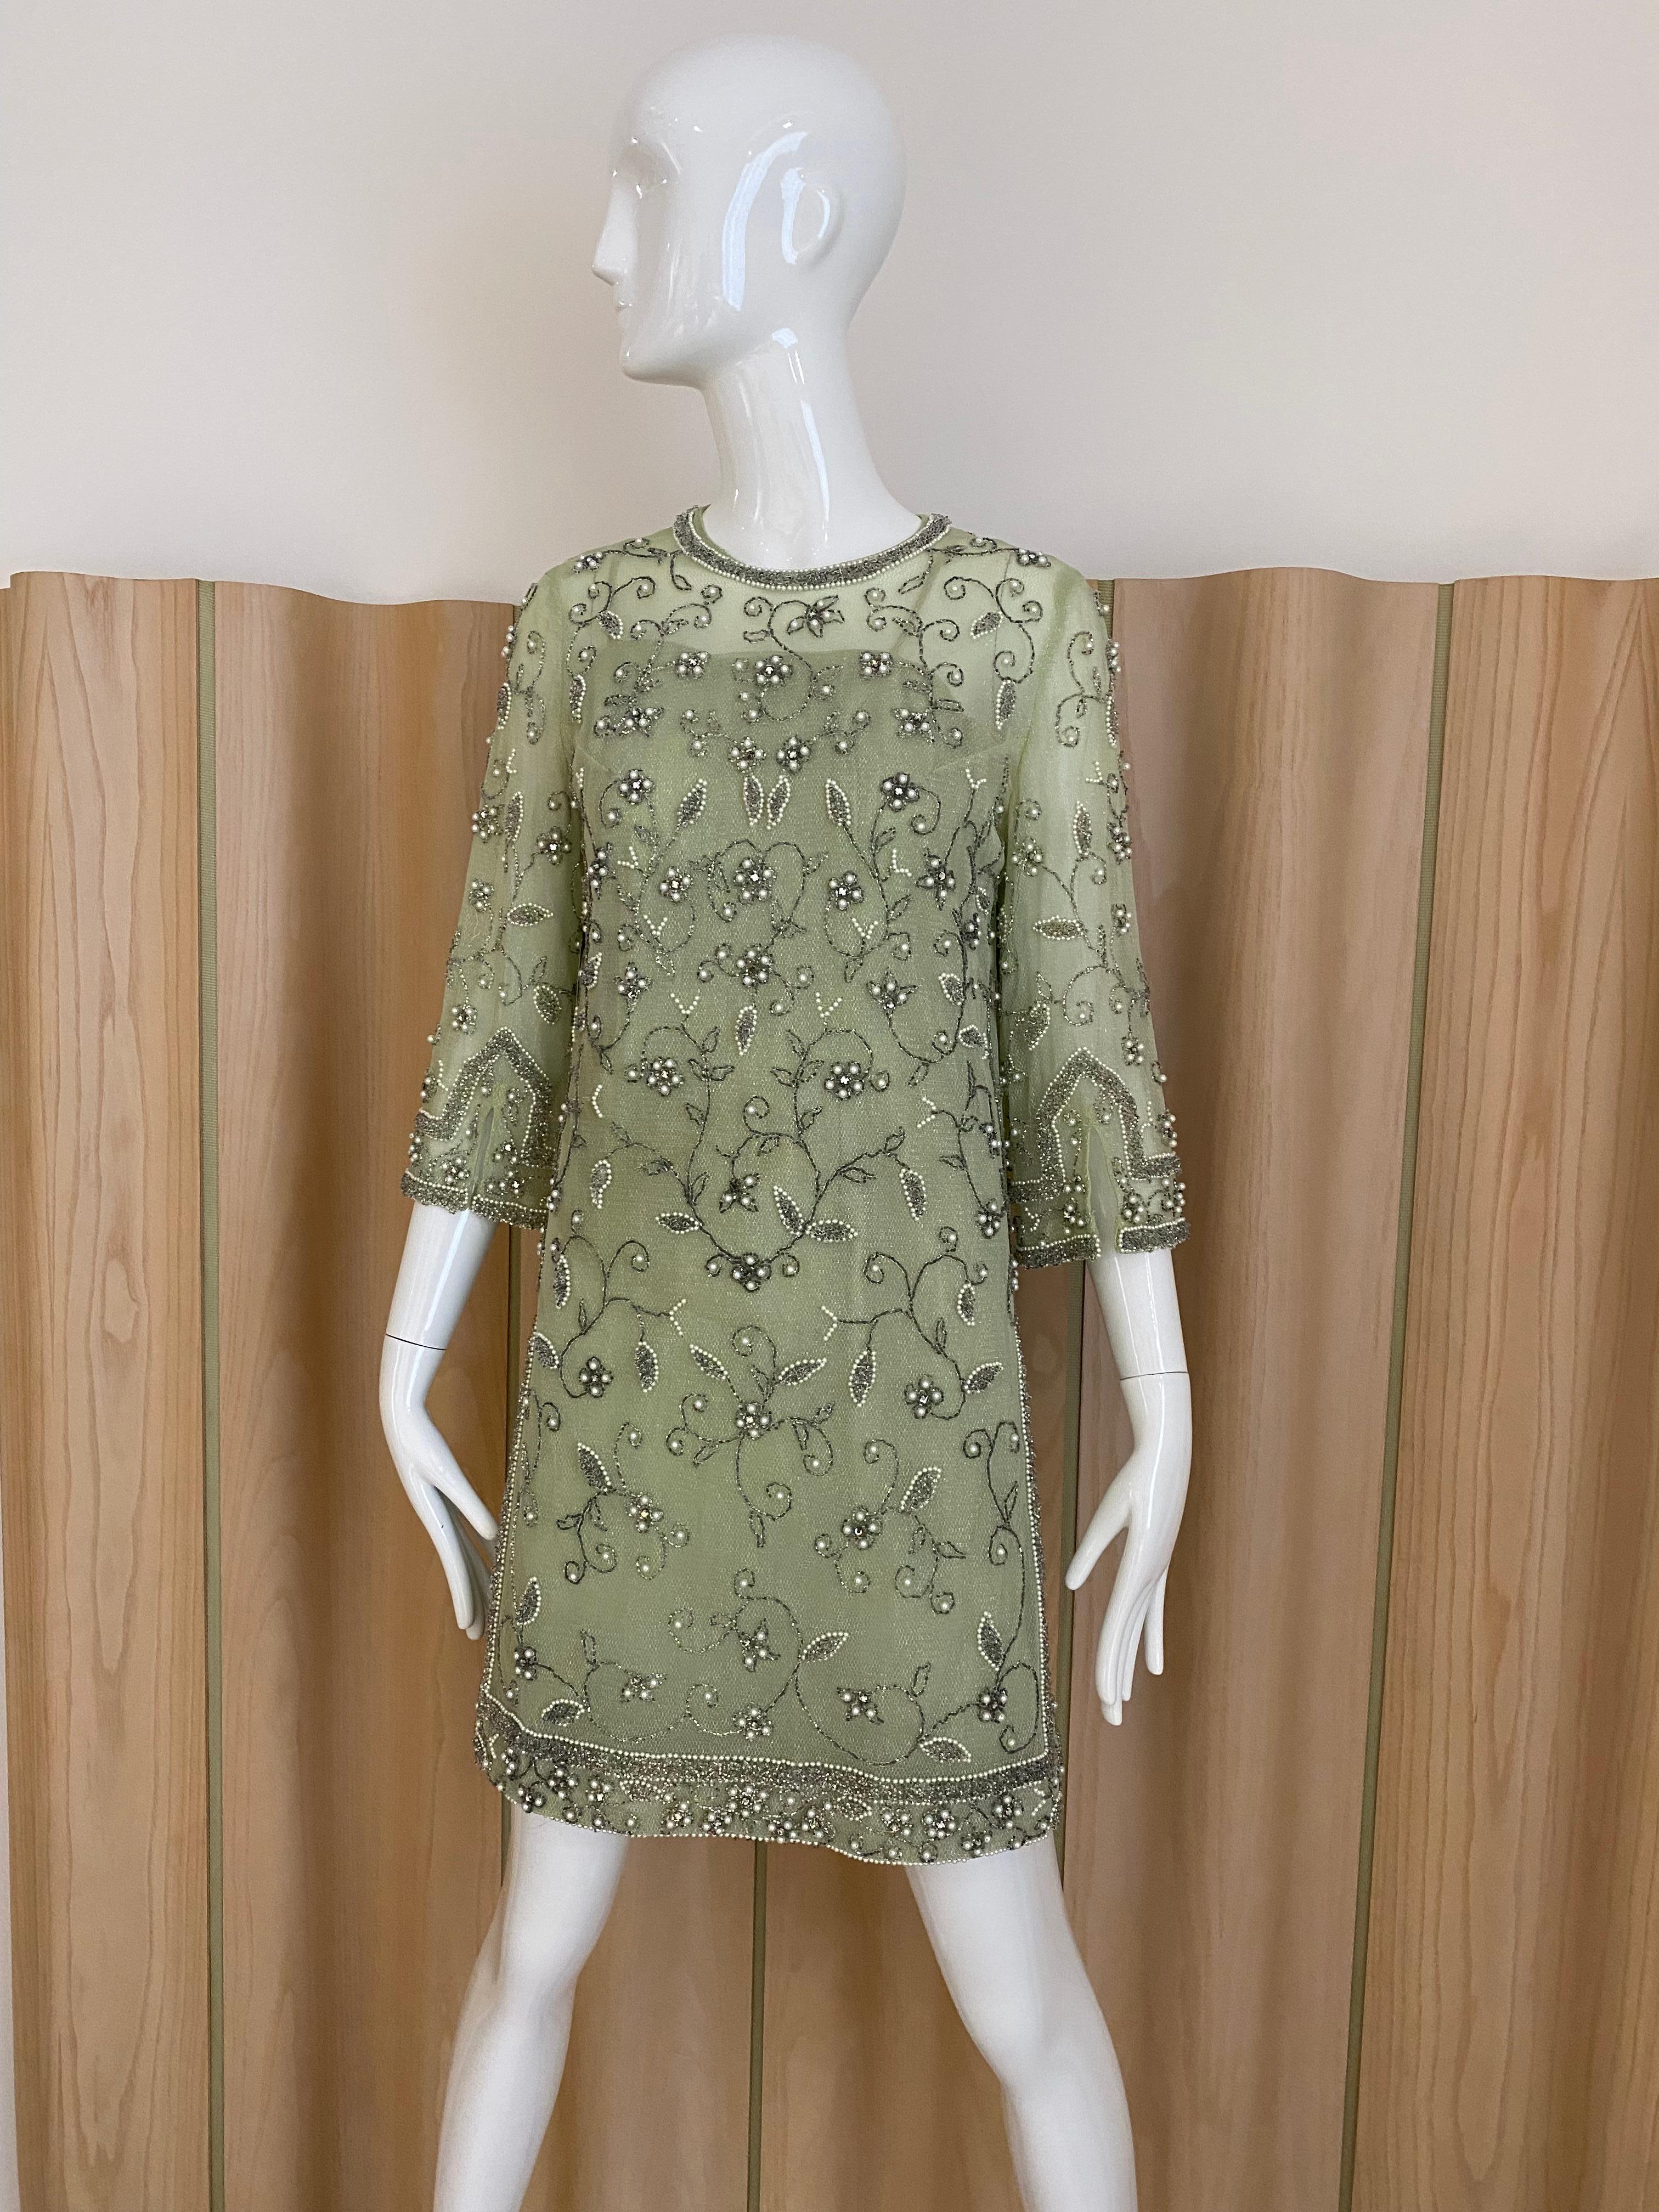 1960s Sheer light green sheer dress beaded in pearls   . Dress comes with light green slip. perfect for wedding or cocktail party 
Fit size 4

*** slip has stains see image attached